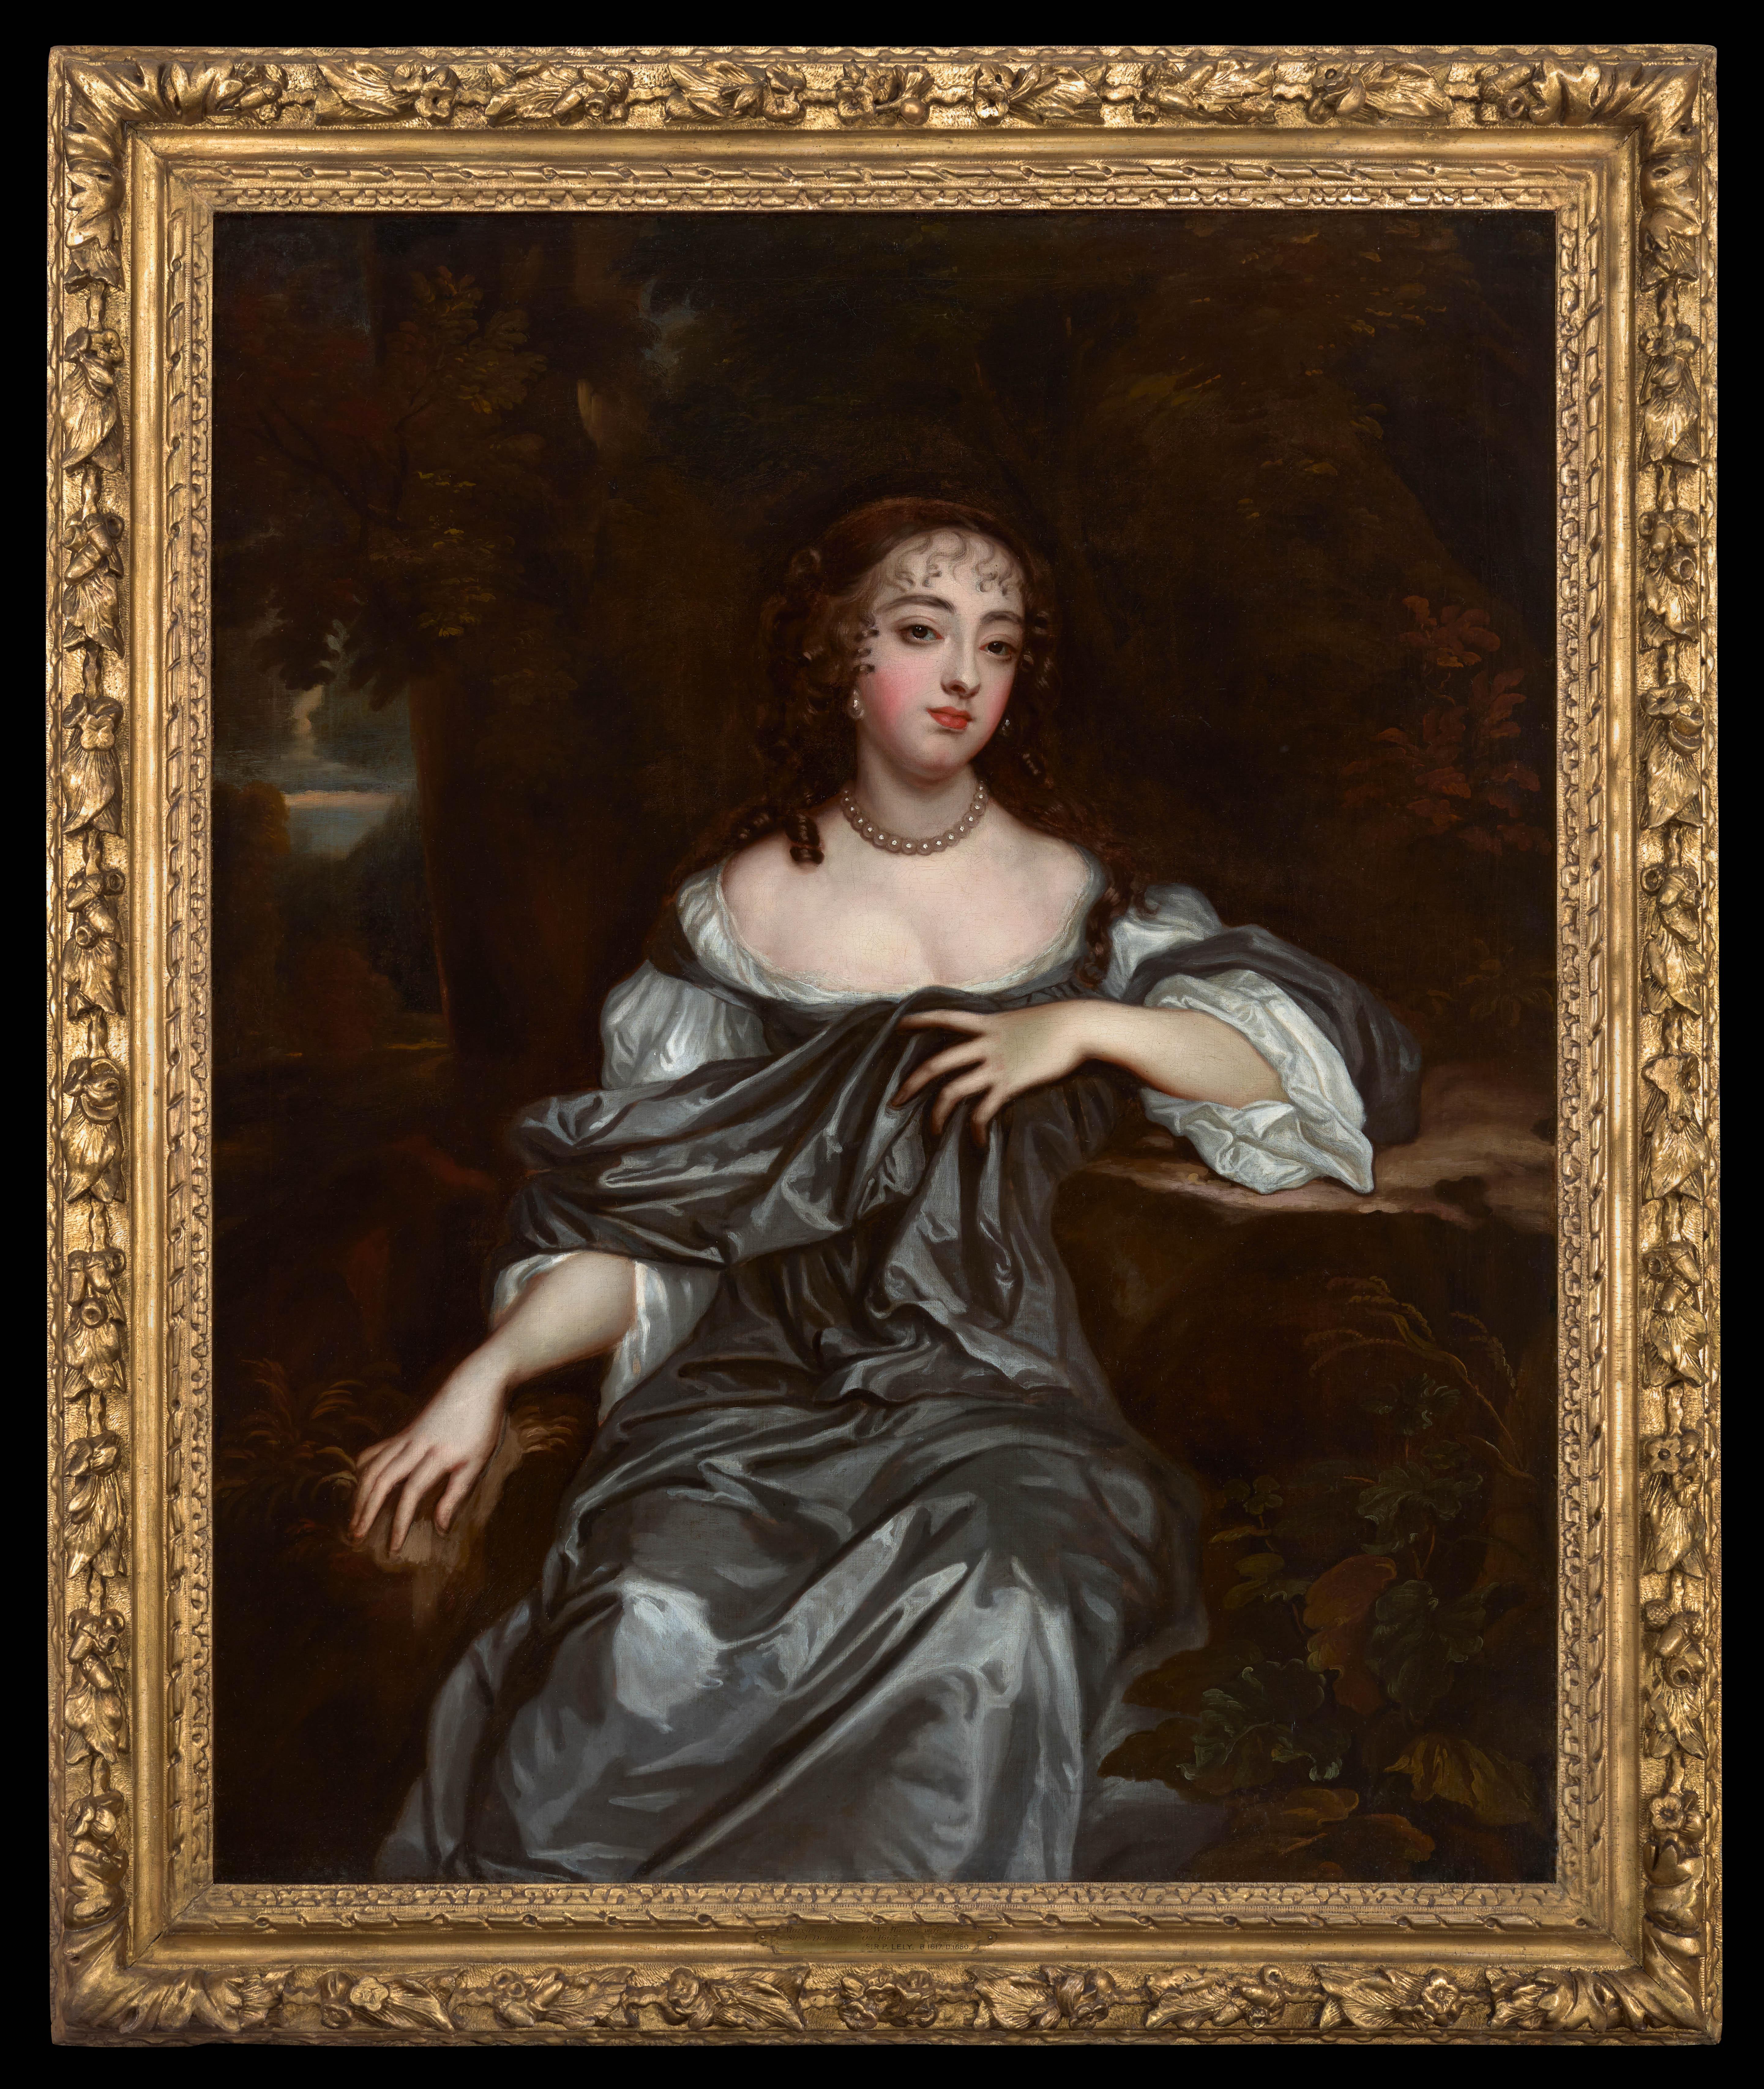 Portrait of Frances Lady Whitmore nee Brooke, Exquisite Carved Frame, Old Master - Art by Sir Peter Lely